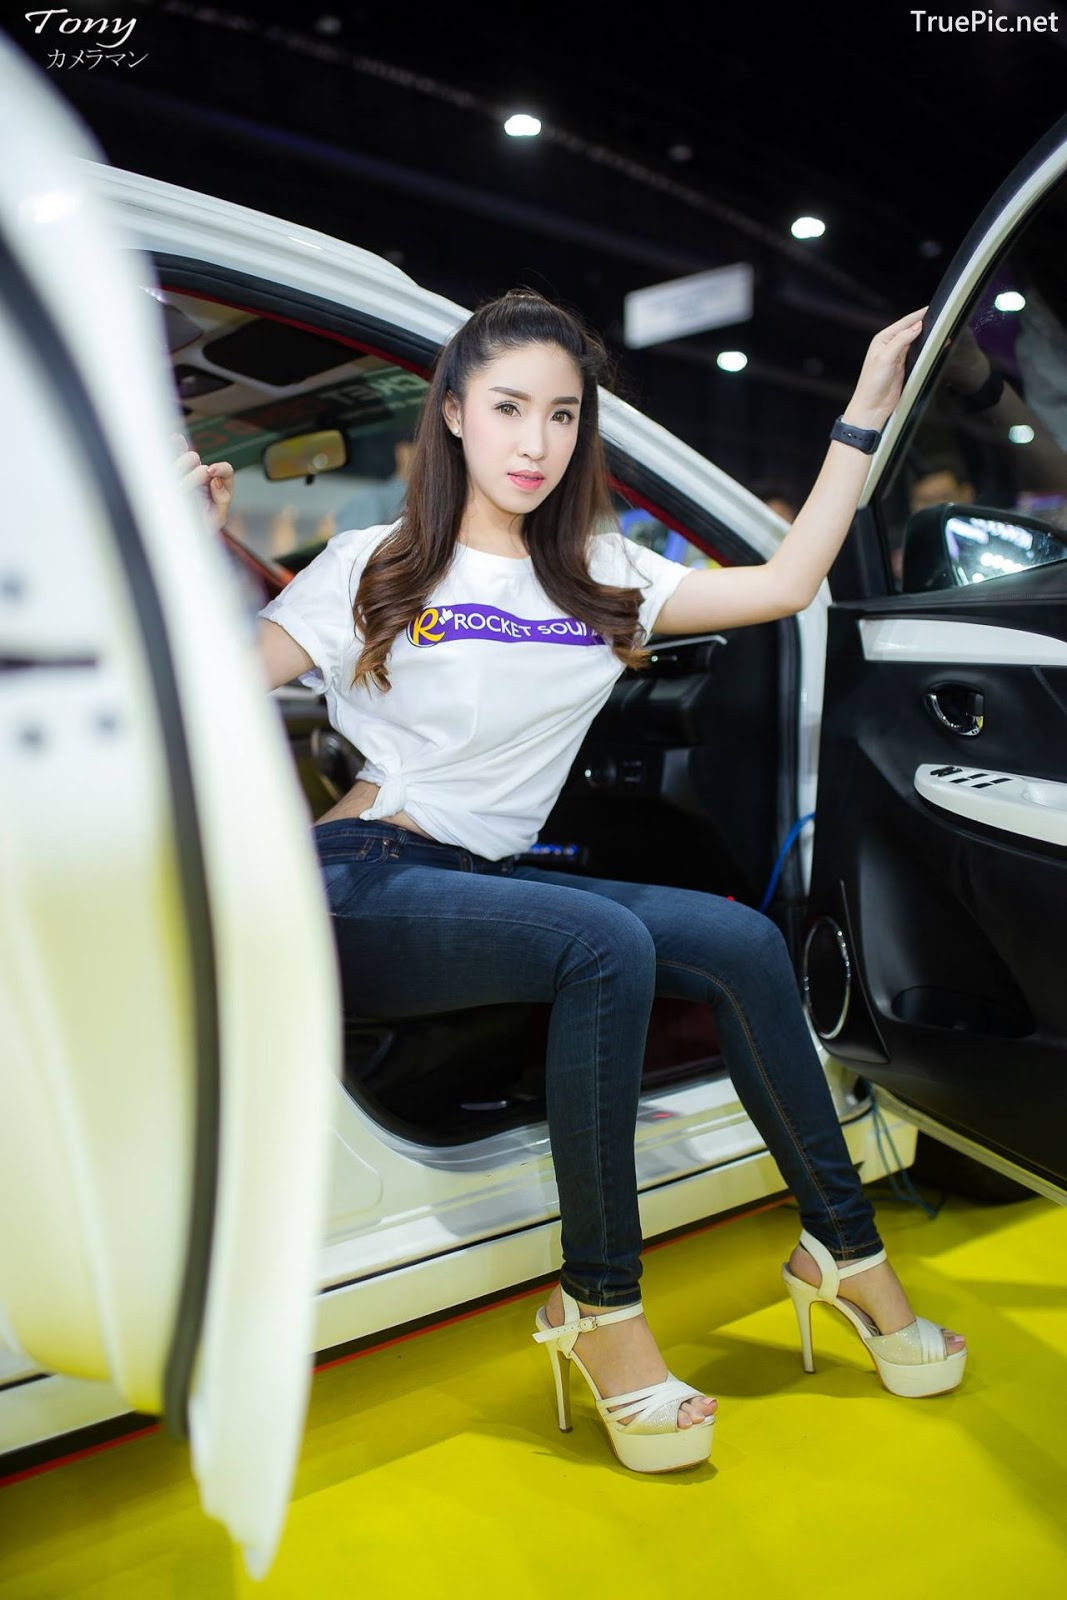 Image-Thailand-Hot-Model-Thai-Racing-Girl-At-Motor-Expo-2018-TruePic.net- Picture-90